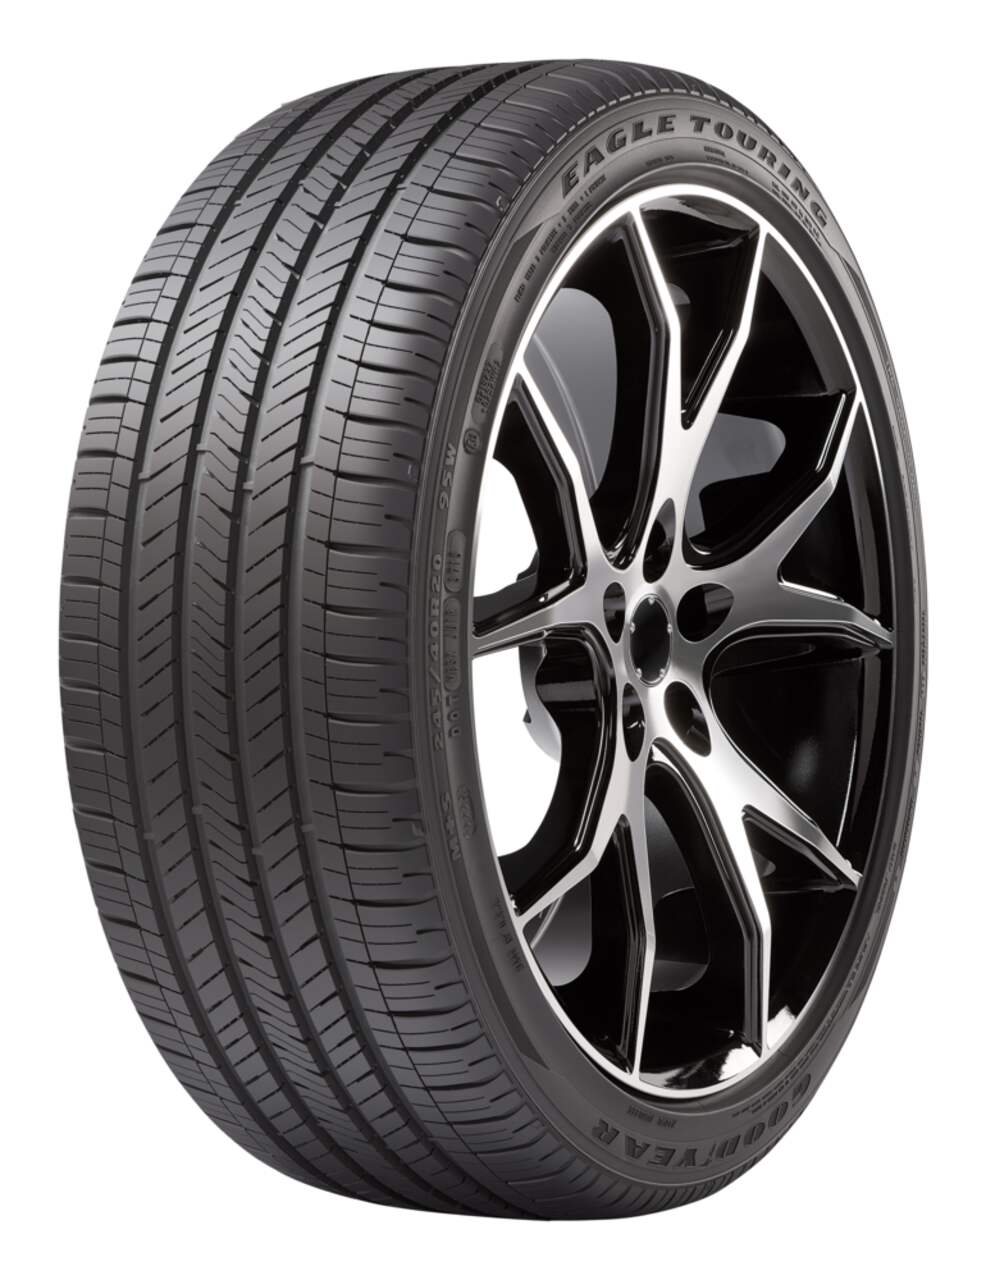 Goodyear Eagle F1 A/S Performance Tire For Passenger & CUV